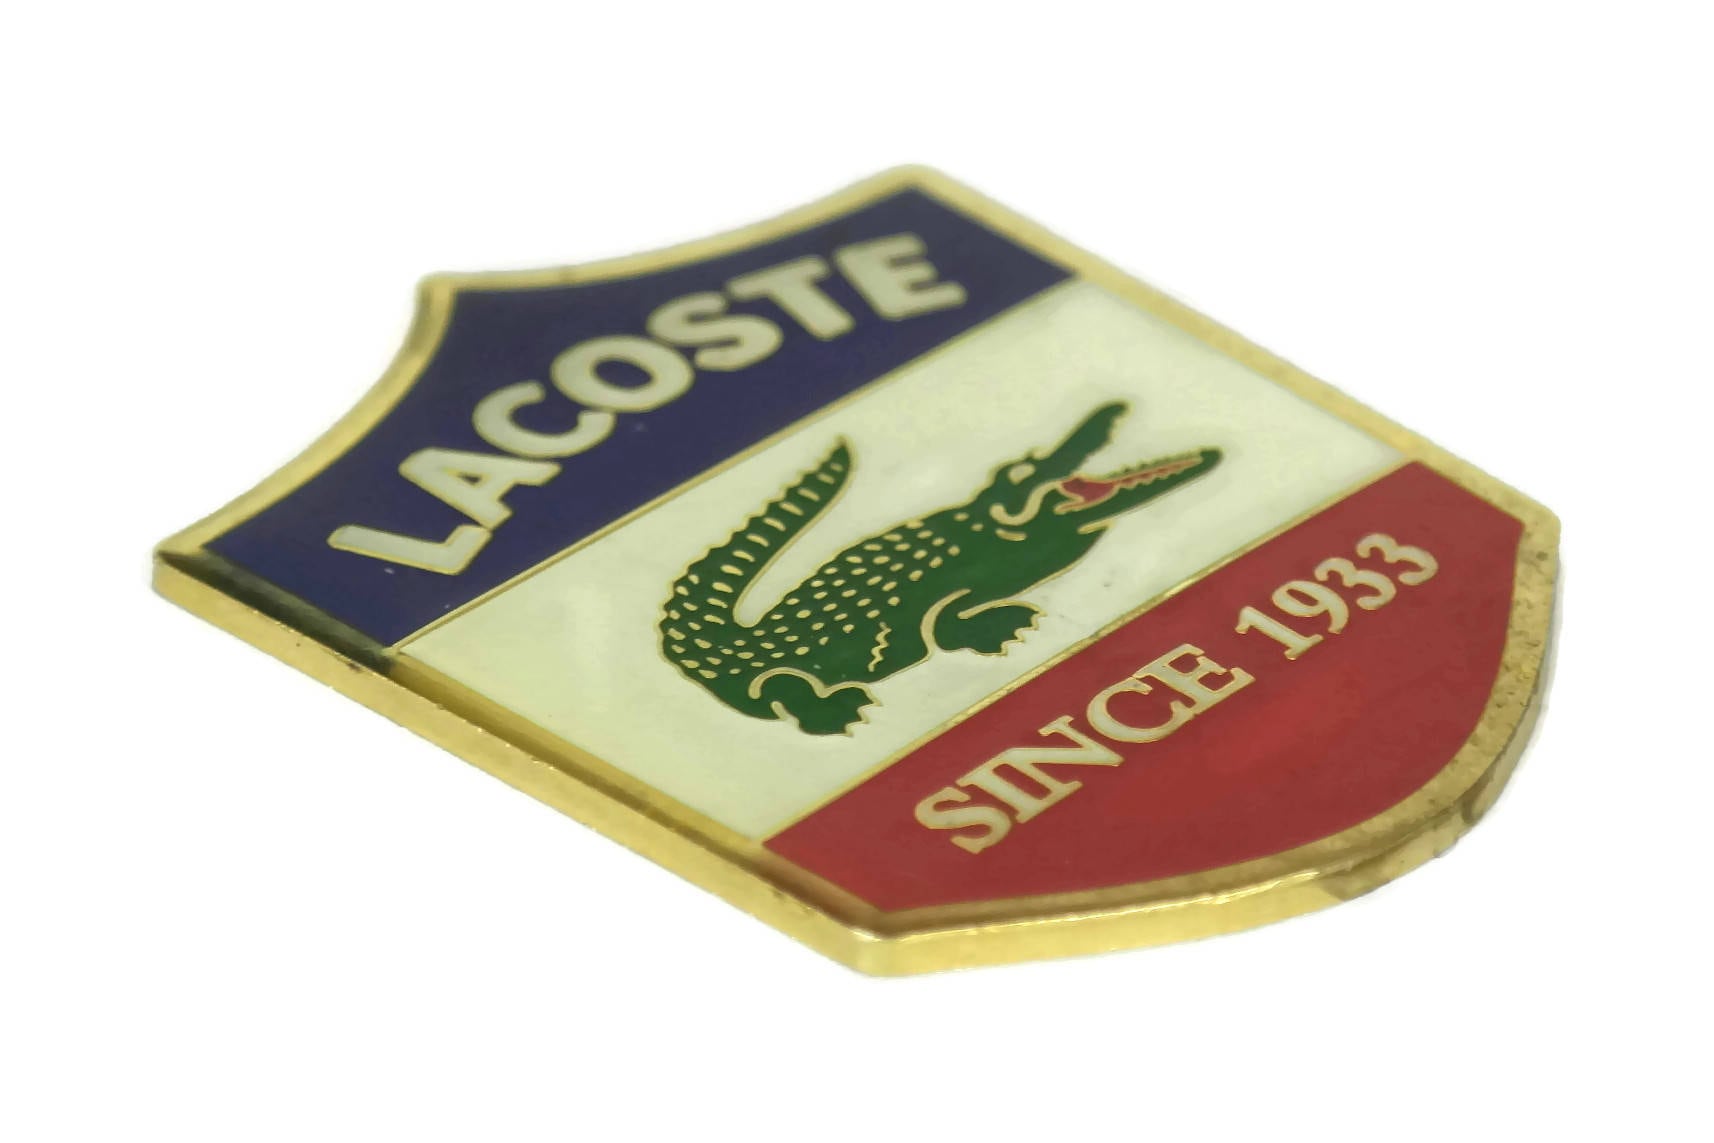 Vintage Lacoste Advertising with Crocodile. French Blue, White and Red Flag, Since Enamel Brass Shield. Fashion Sports Decor.